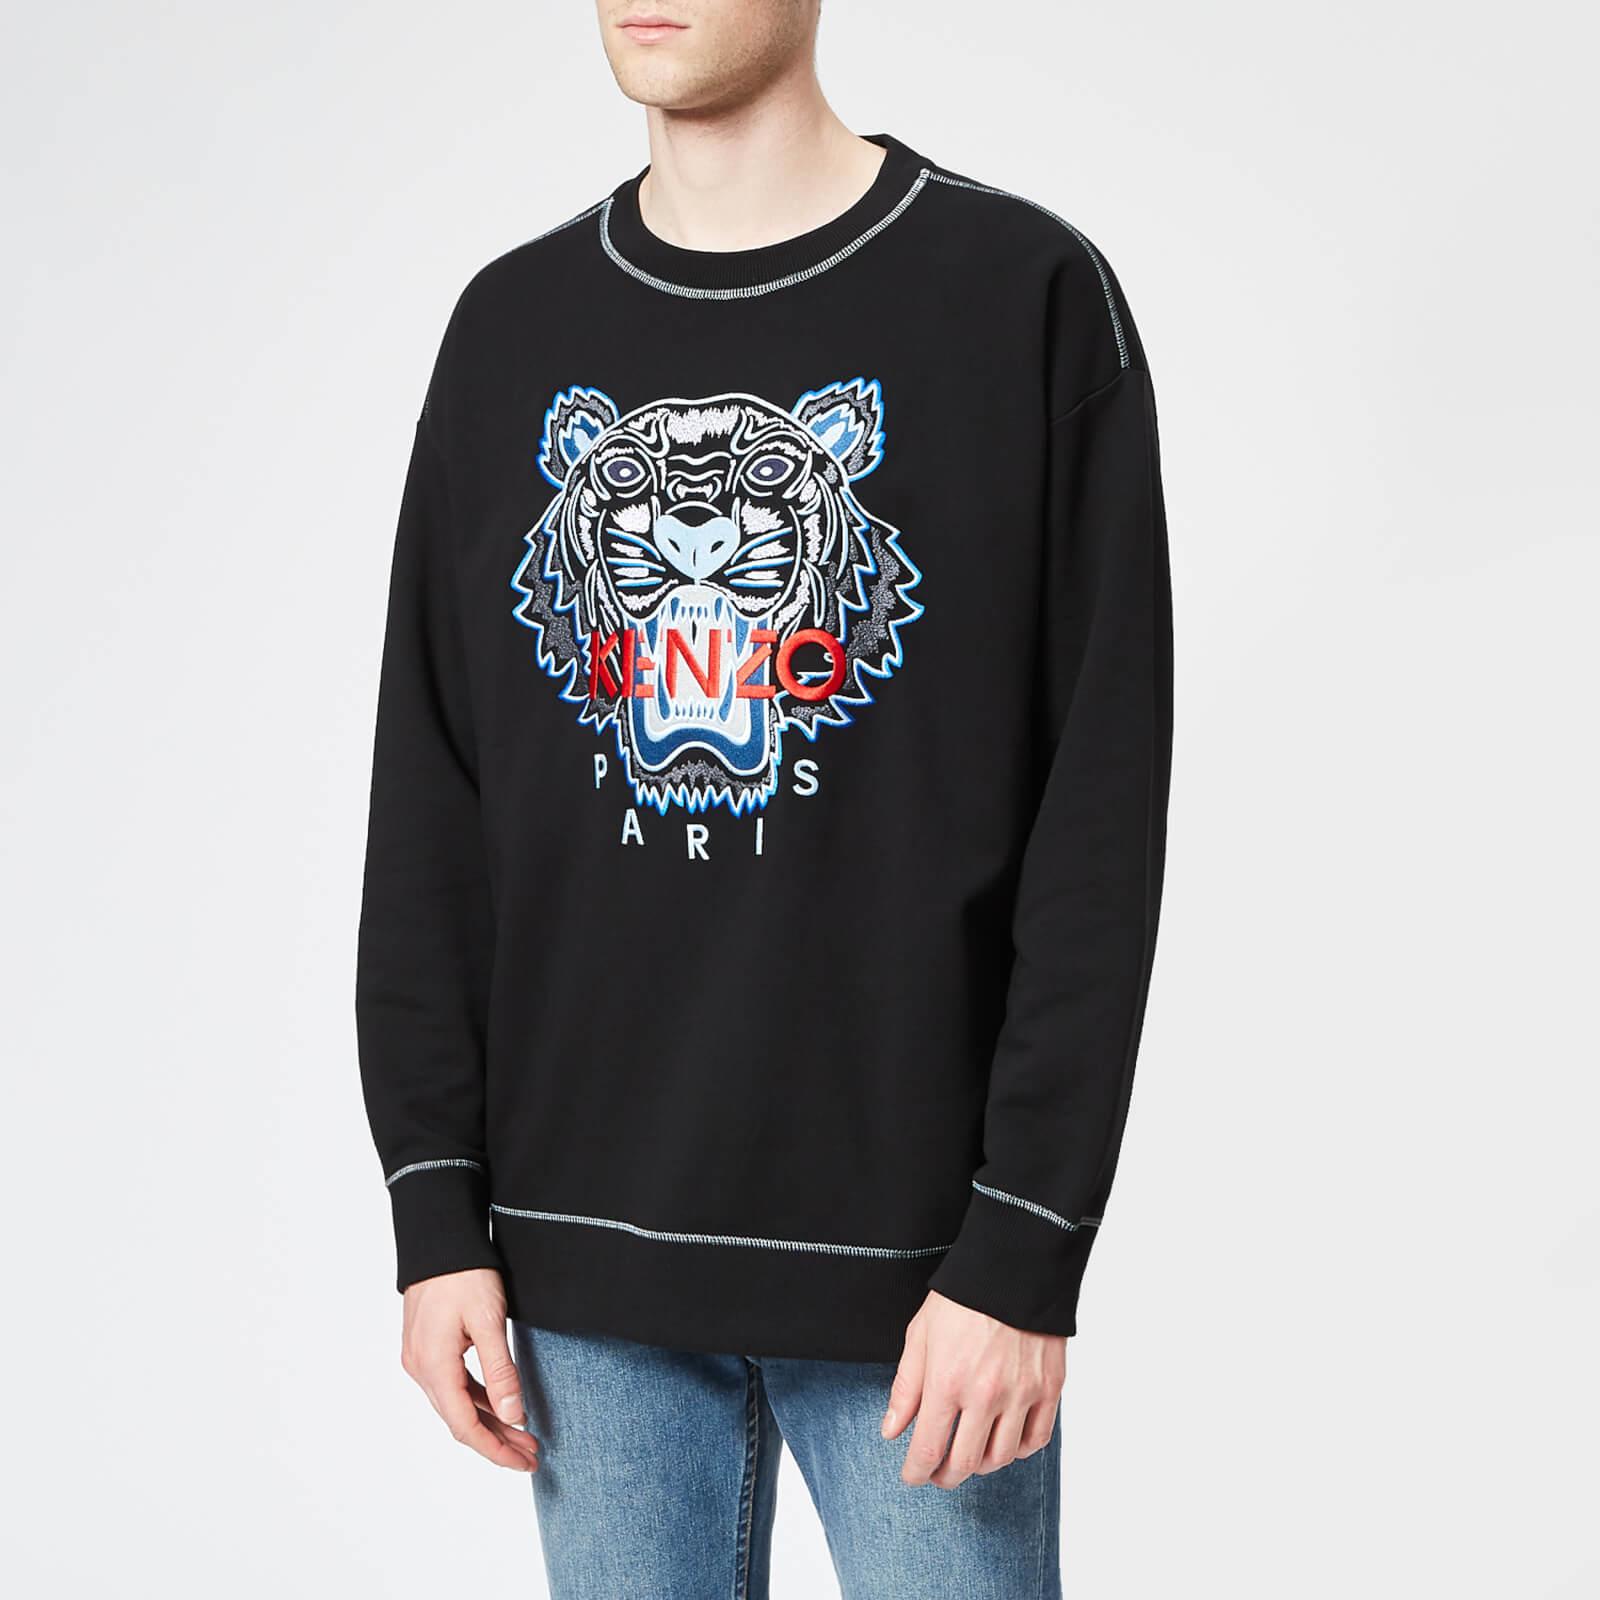 KENZO Cotton New Embroider Tiger Sweatshirt in Black for Men - Lyst